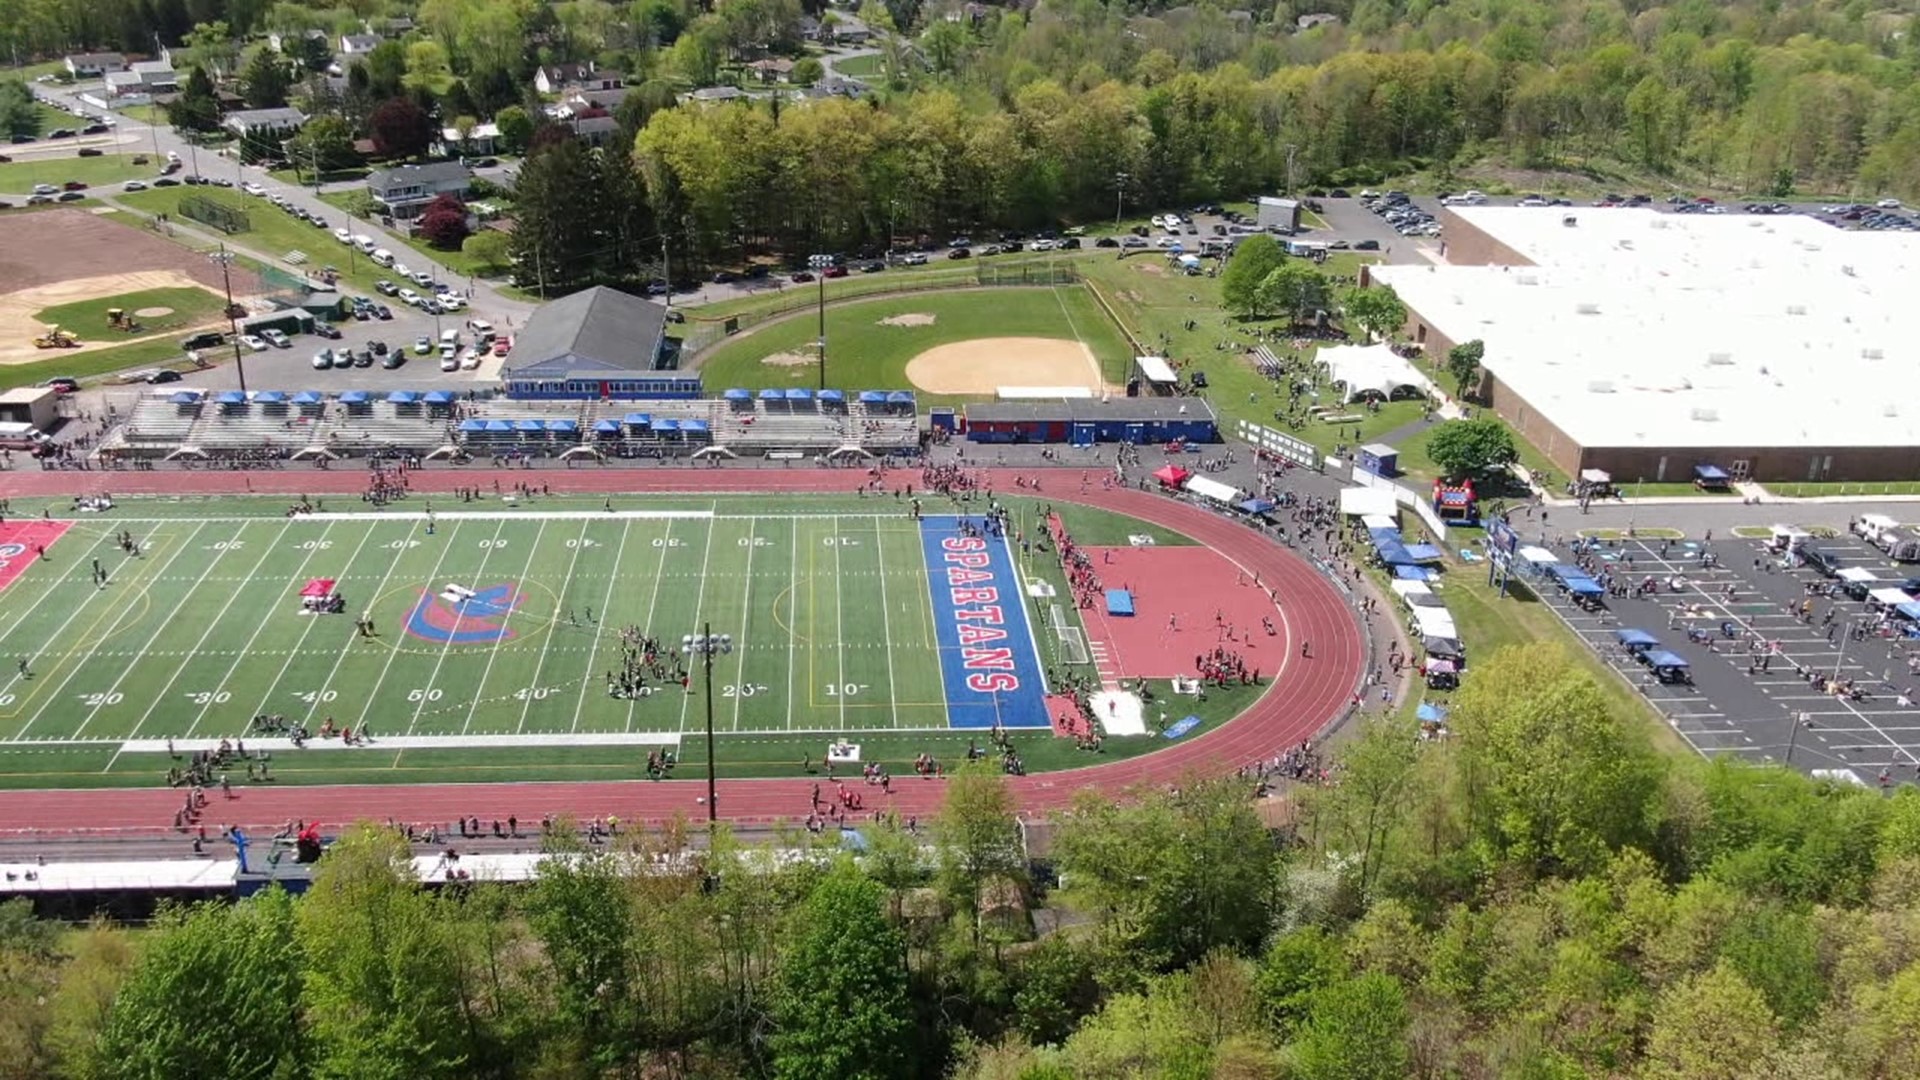 Similar to the Special Olympics, the Spartan Games is a county-wide track meet hosted by the North Schuylkill School District.